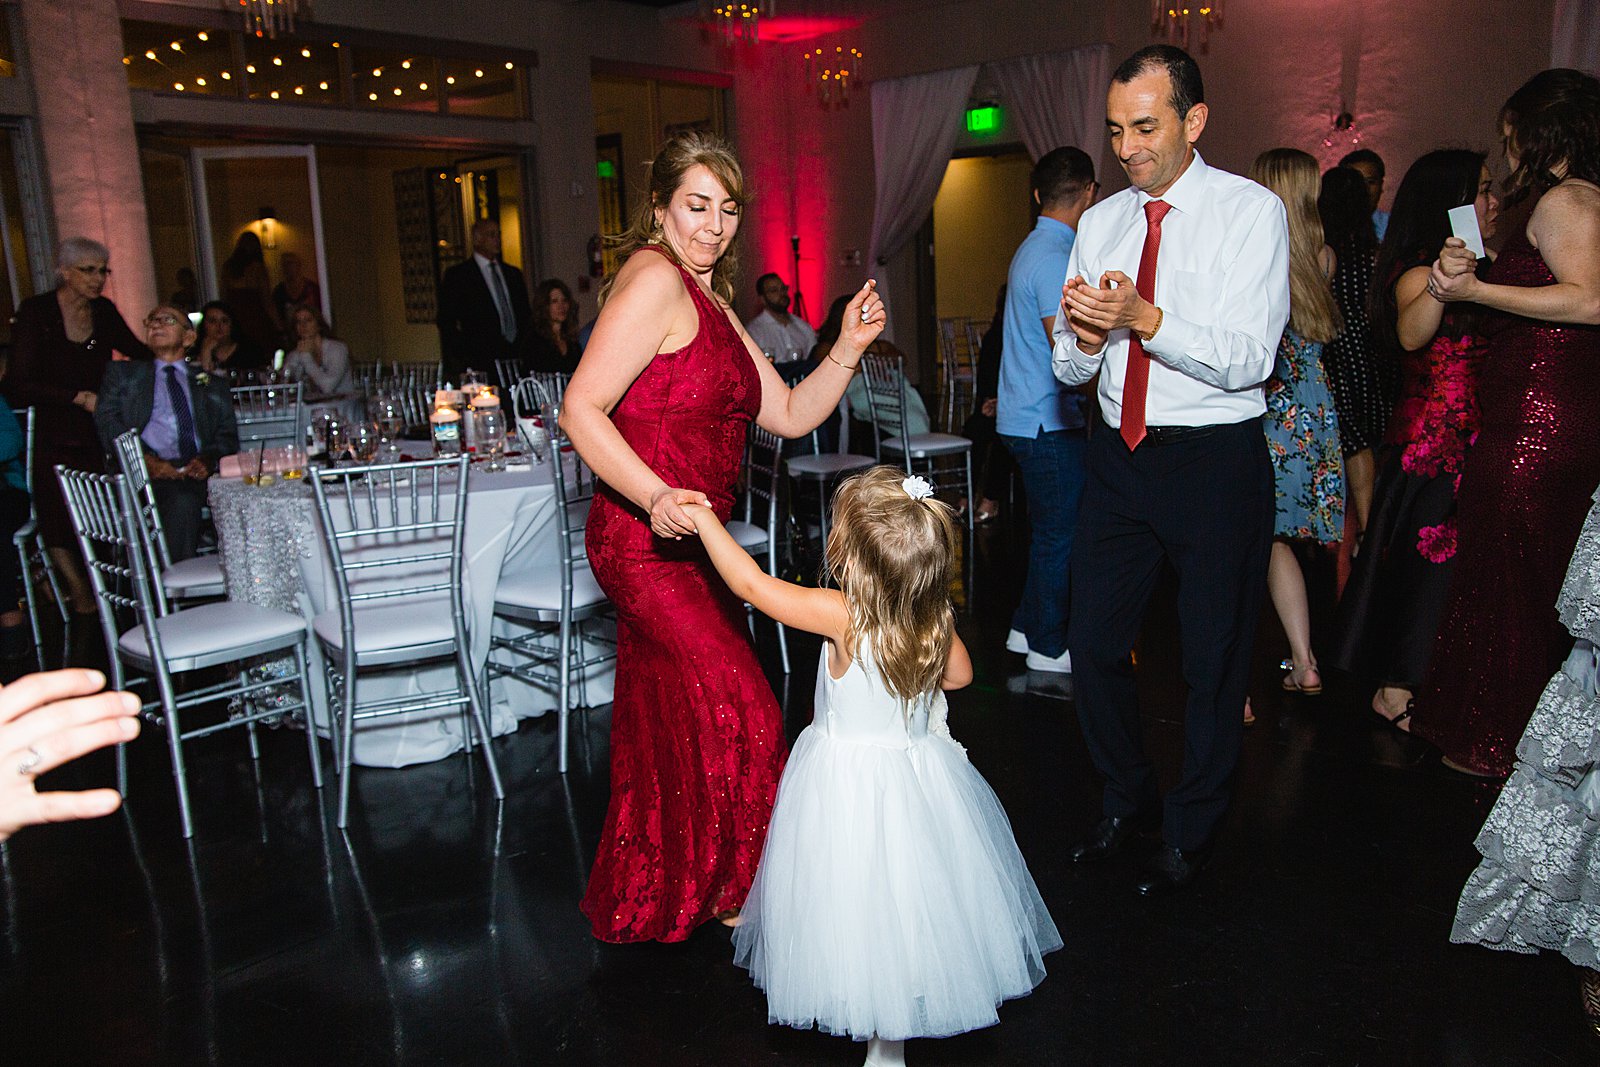 Guests dancing together at a SoHo63 wedding reception by PMA Photography.